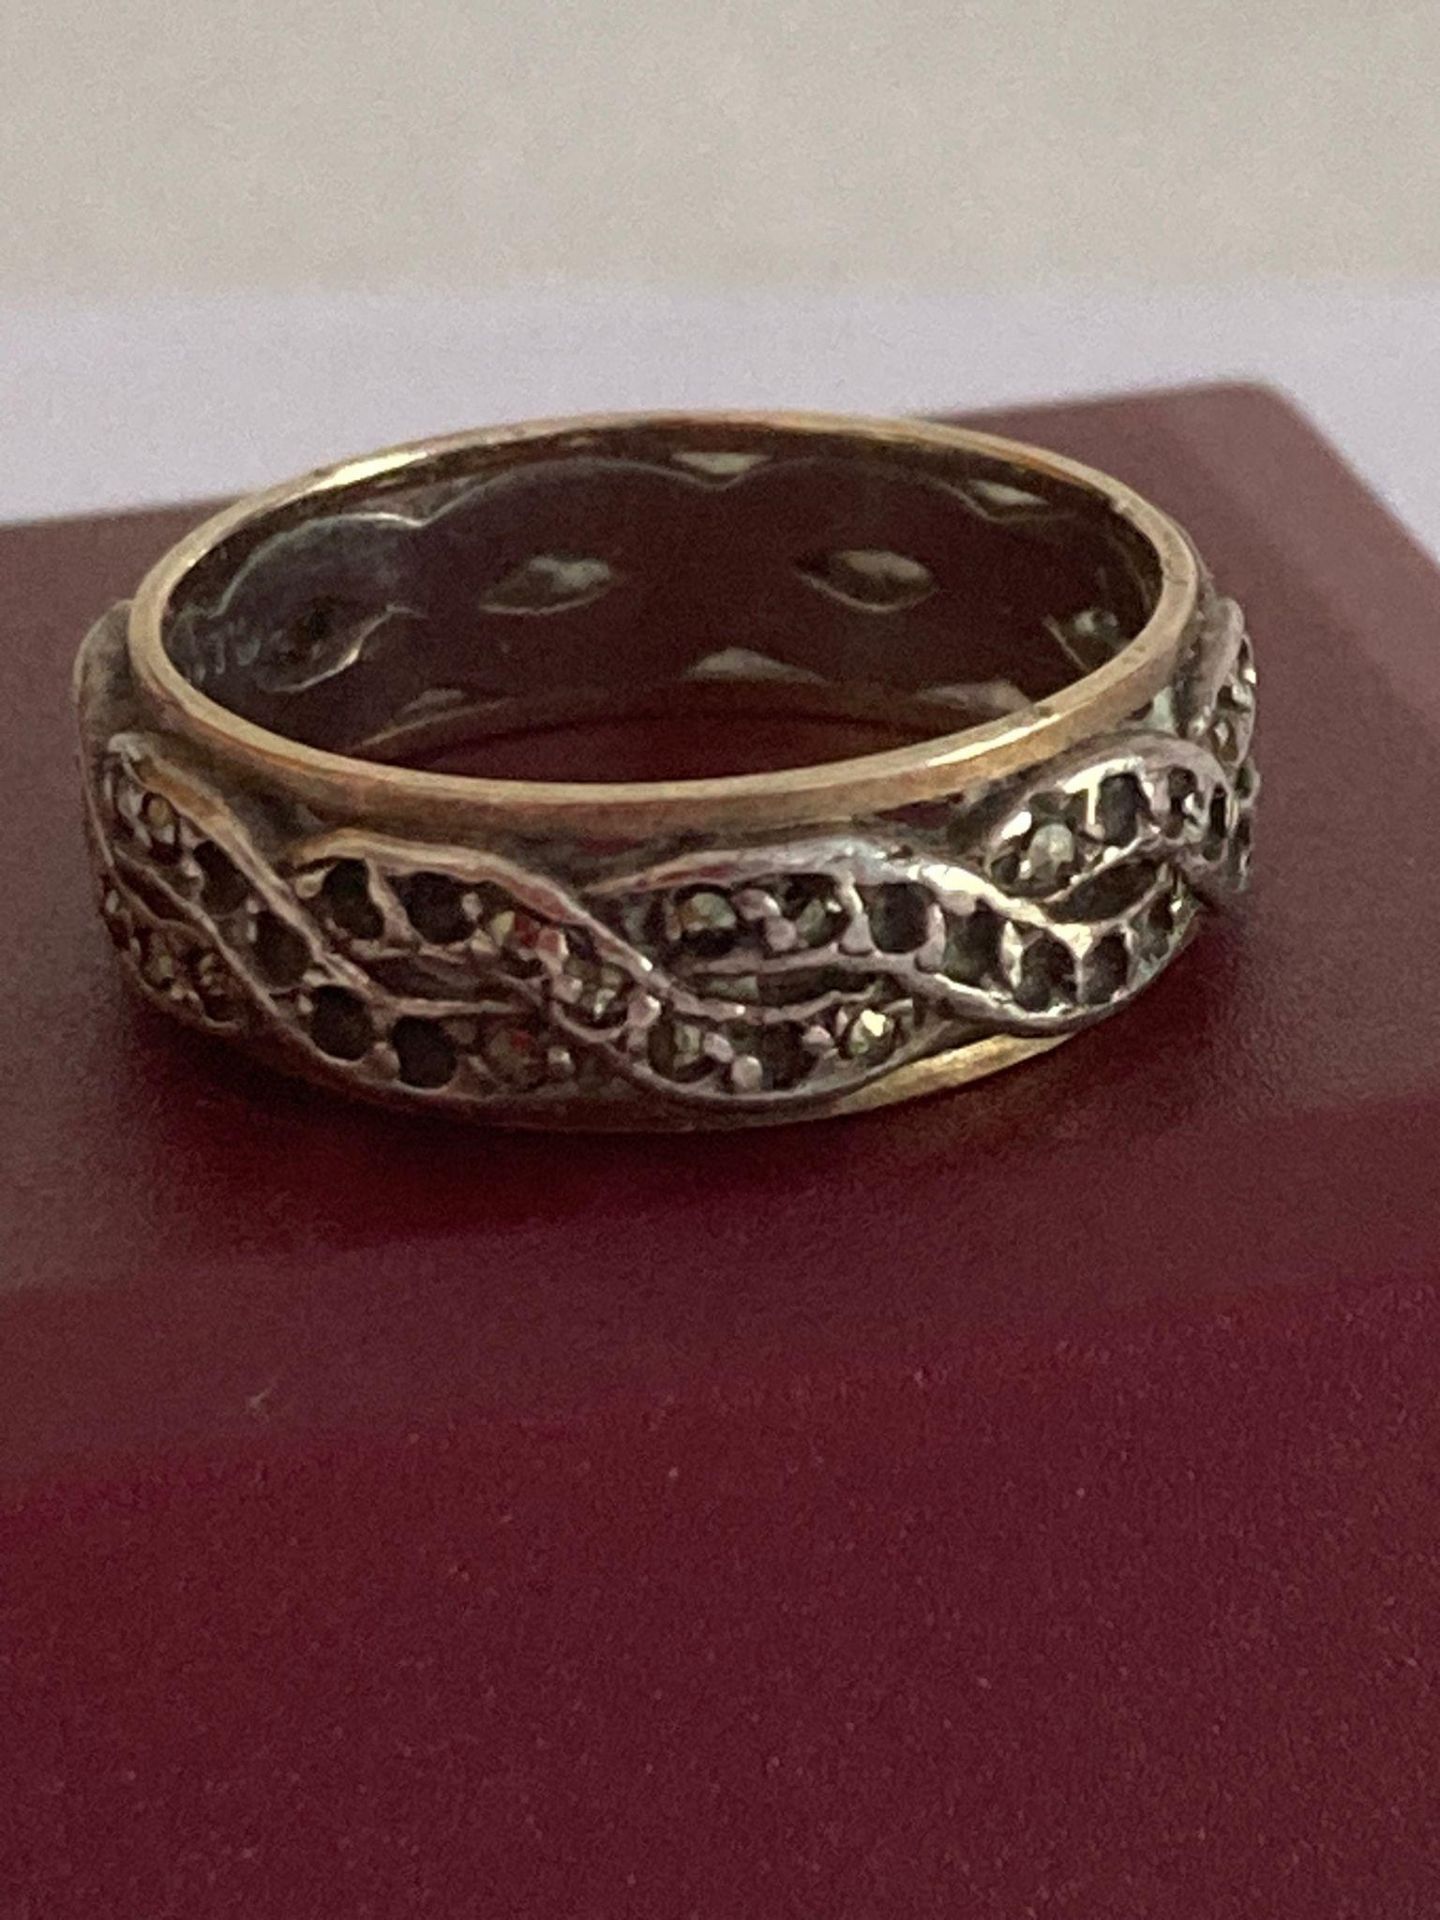 9 carat GOLD and SILVER ETERNITY RING. Complete with ring box. 4.57 grams. Size P 1/2.